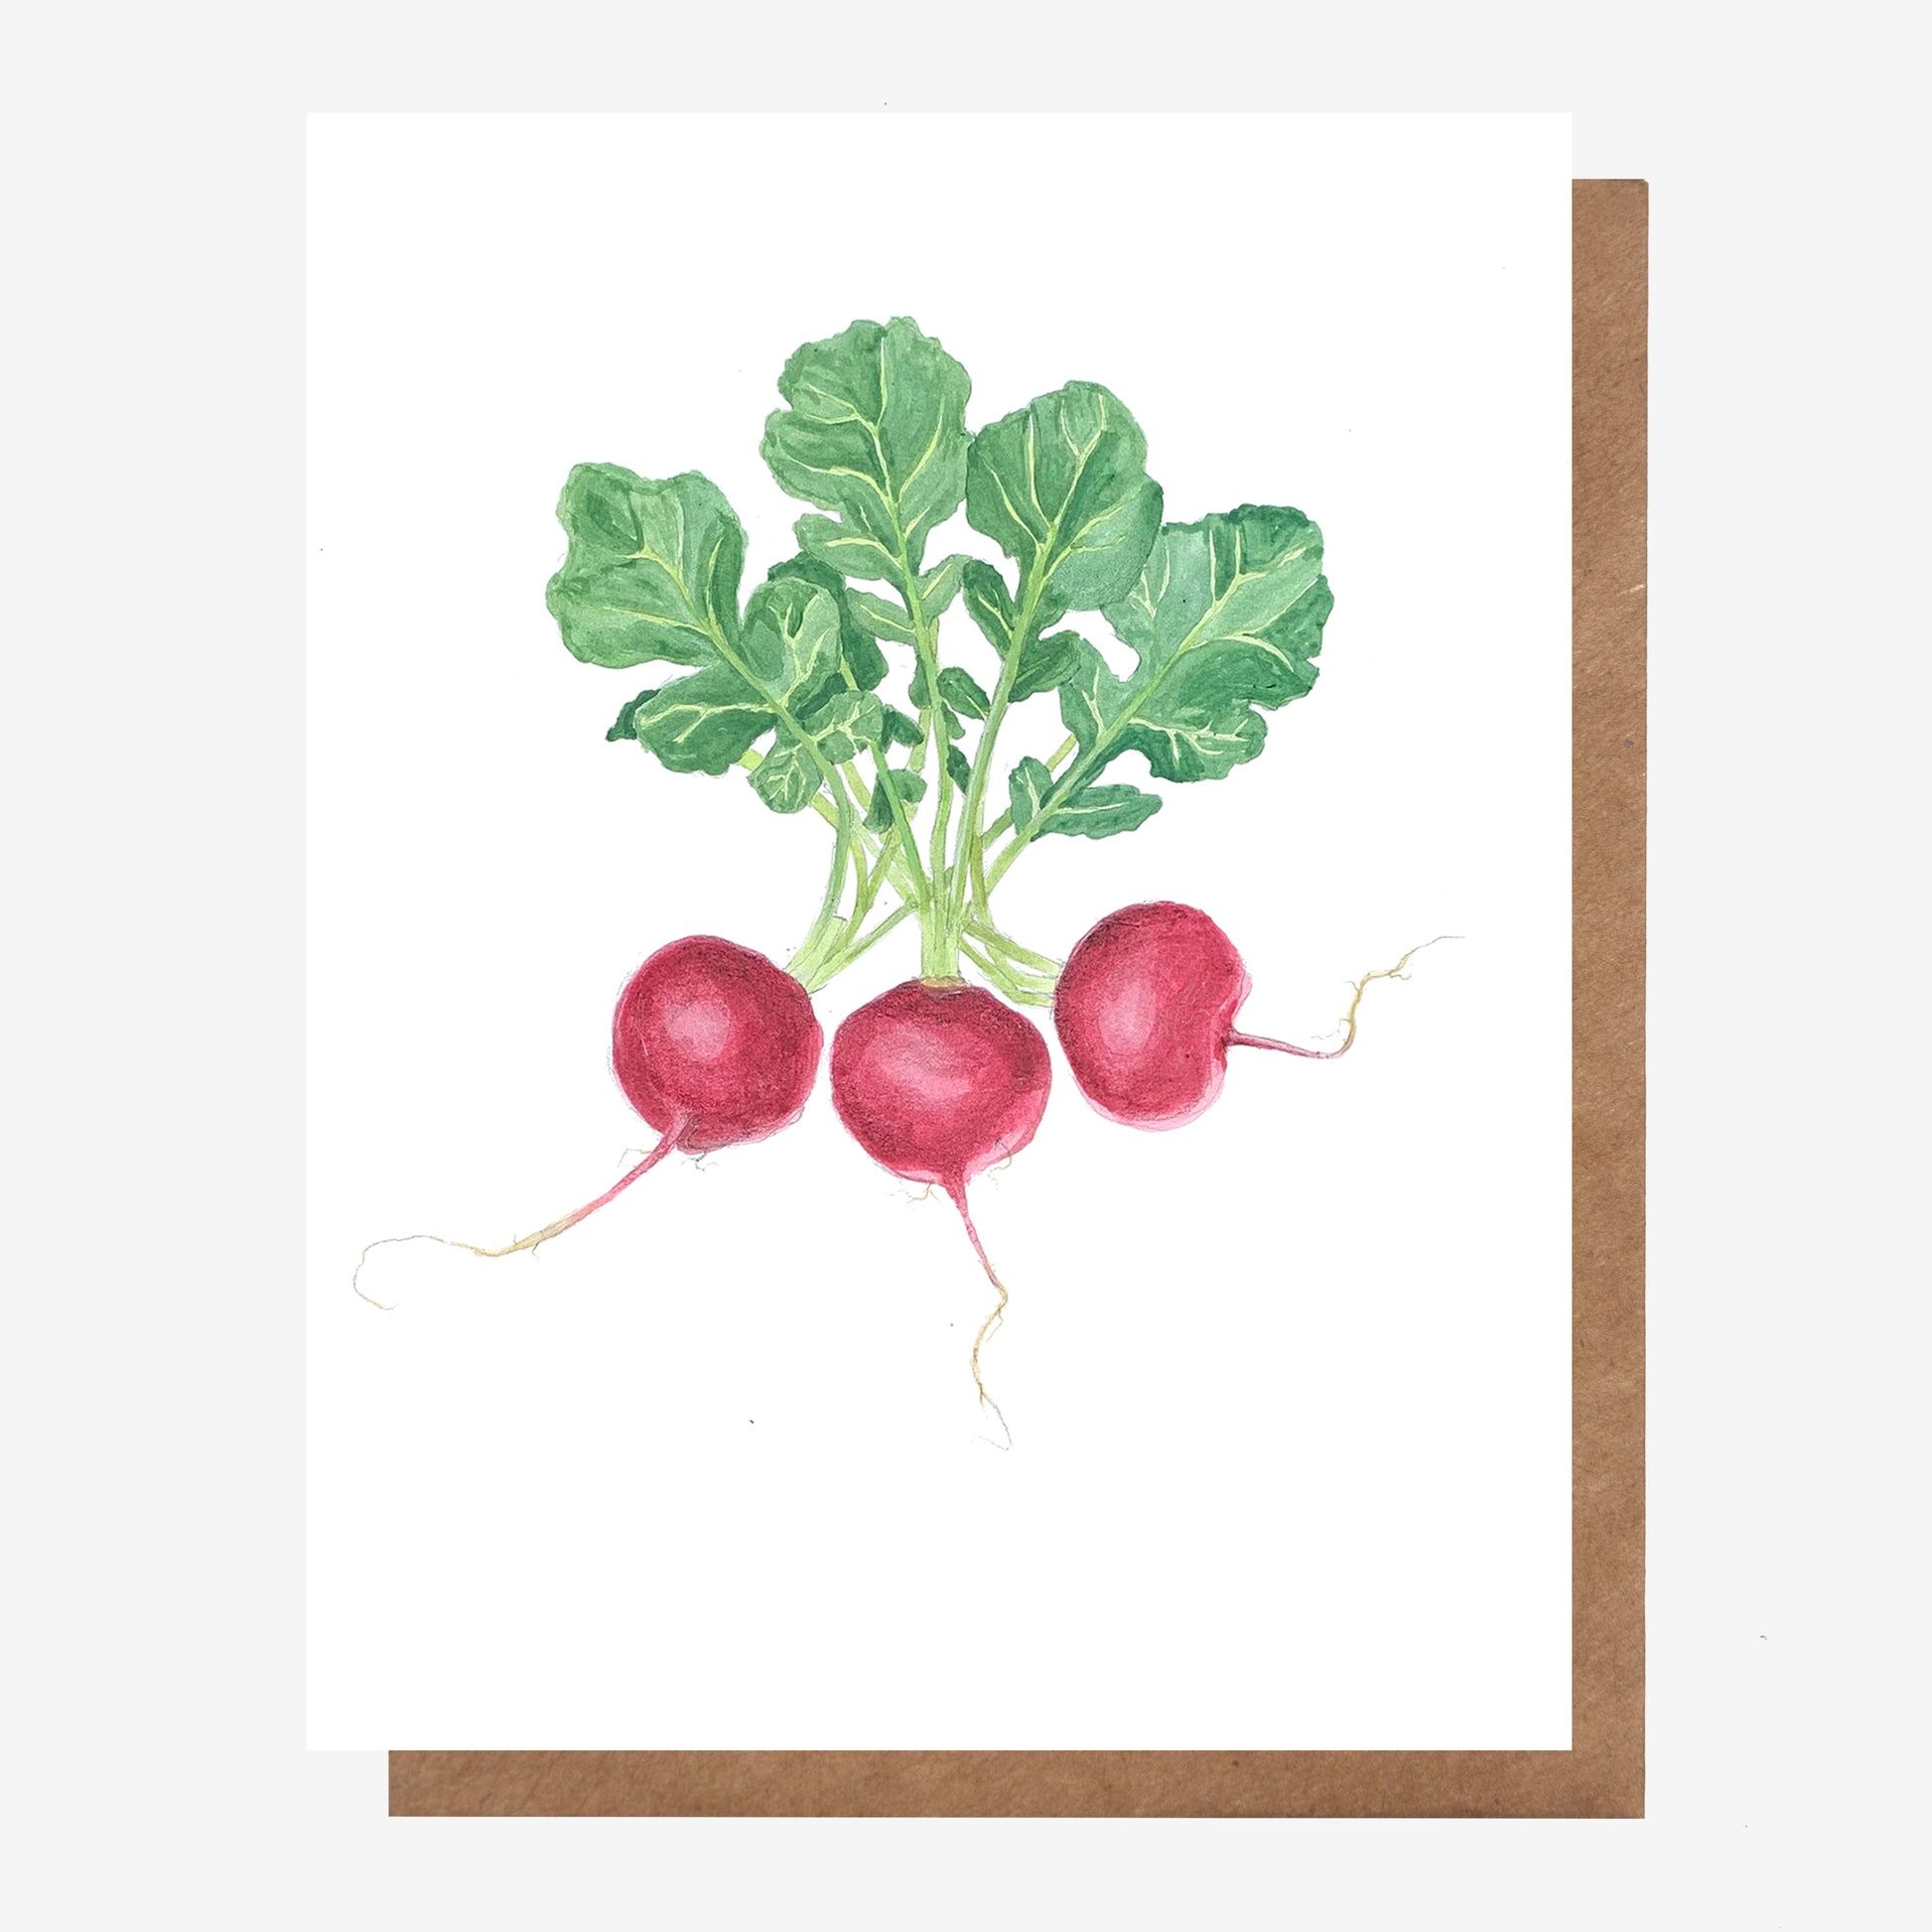 Hand drawn Radish Root Vegetable greeting card for all occasions. Made in Nova Scotia, Canada by Coastal Card Co.